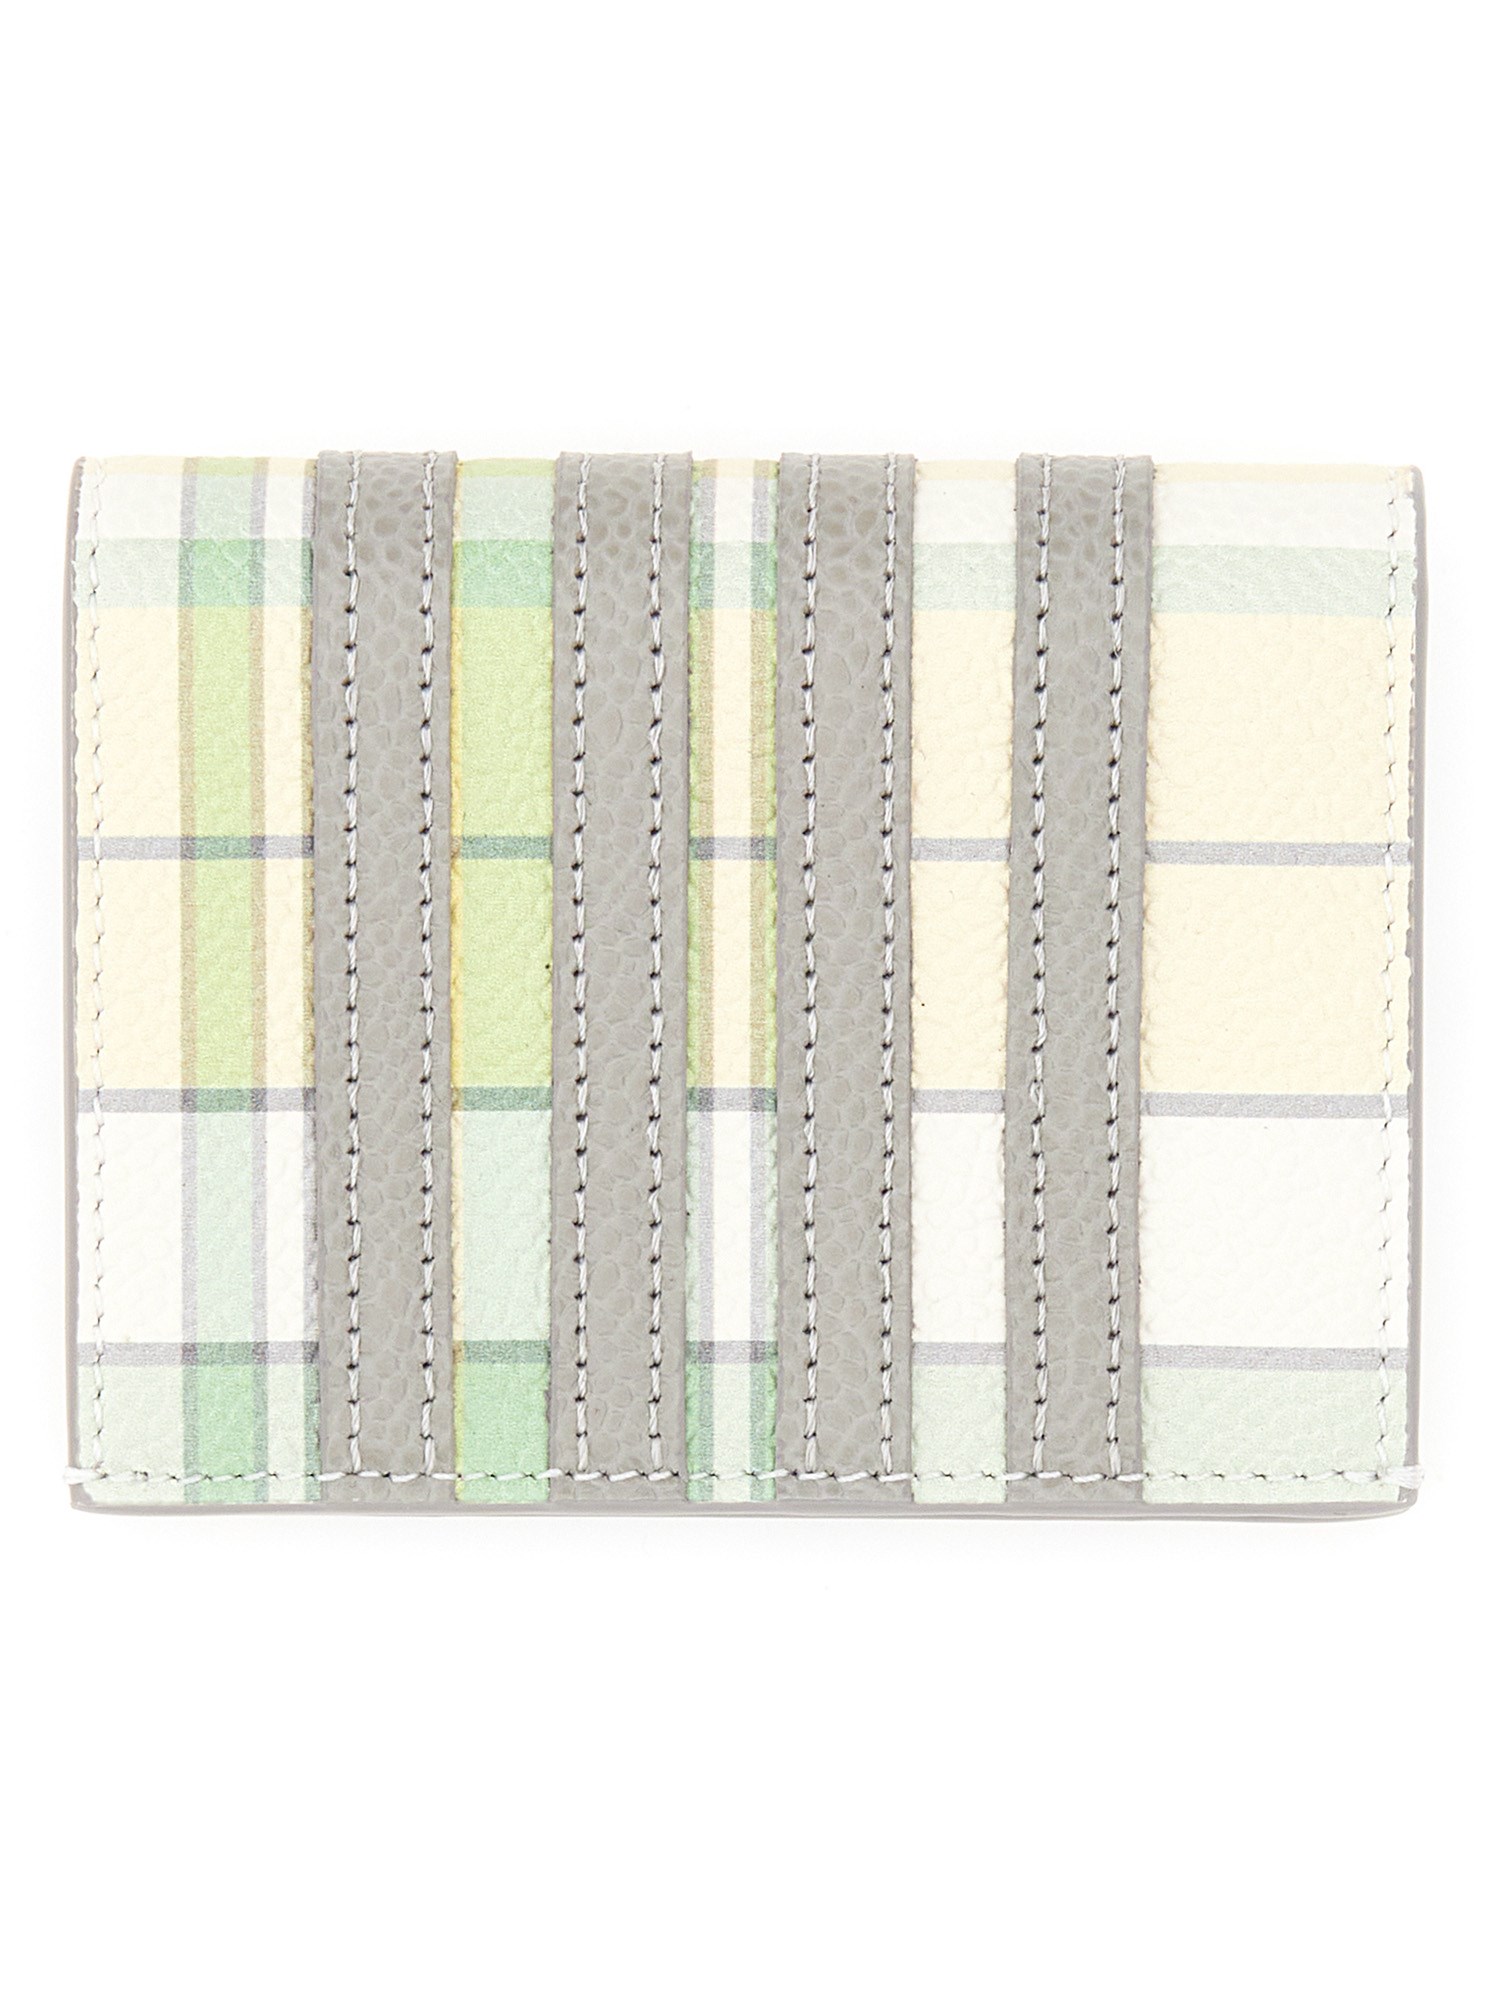 thom browne double card holder